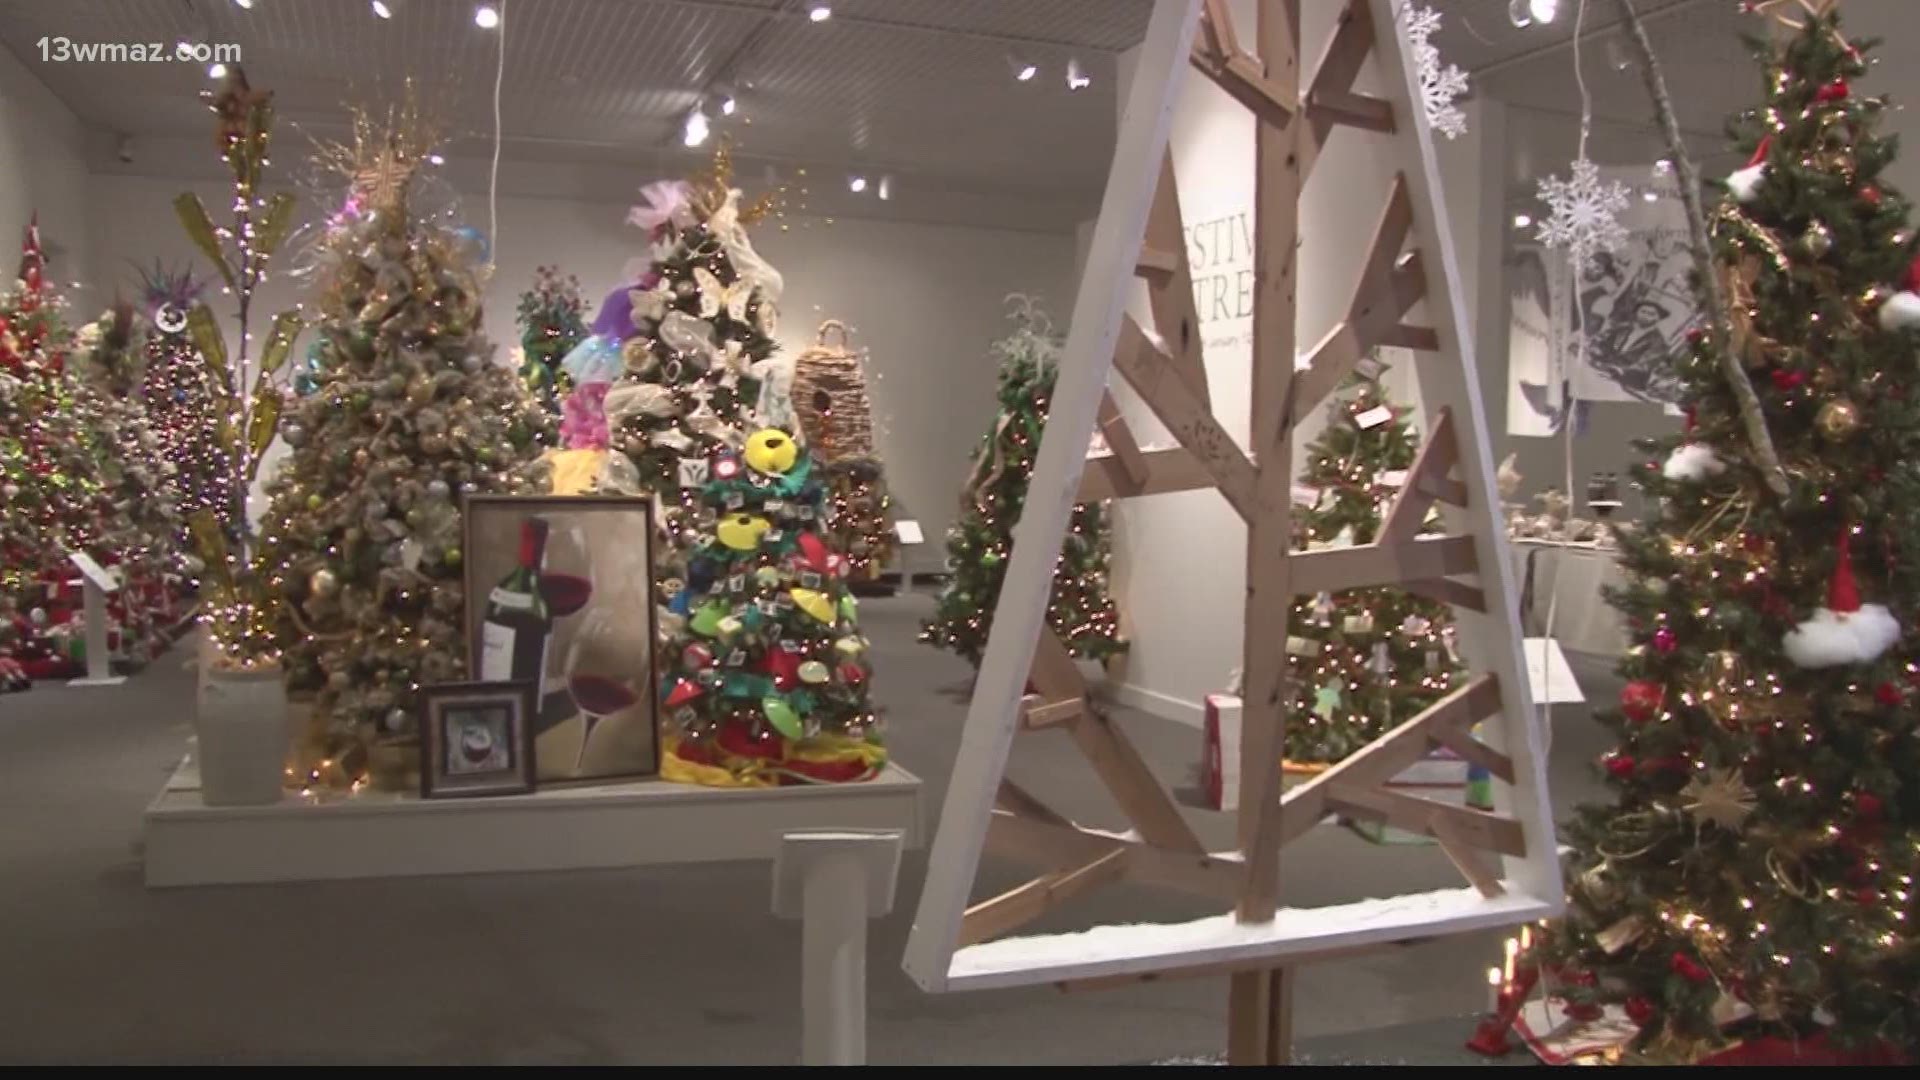 Festival of Trees showcases over 40 custom made Christmas trees designed by people and organizations across Macon.